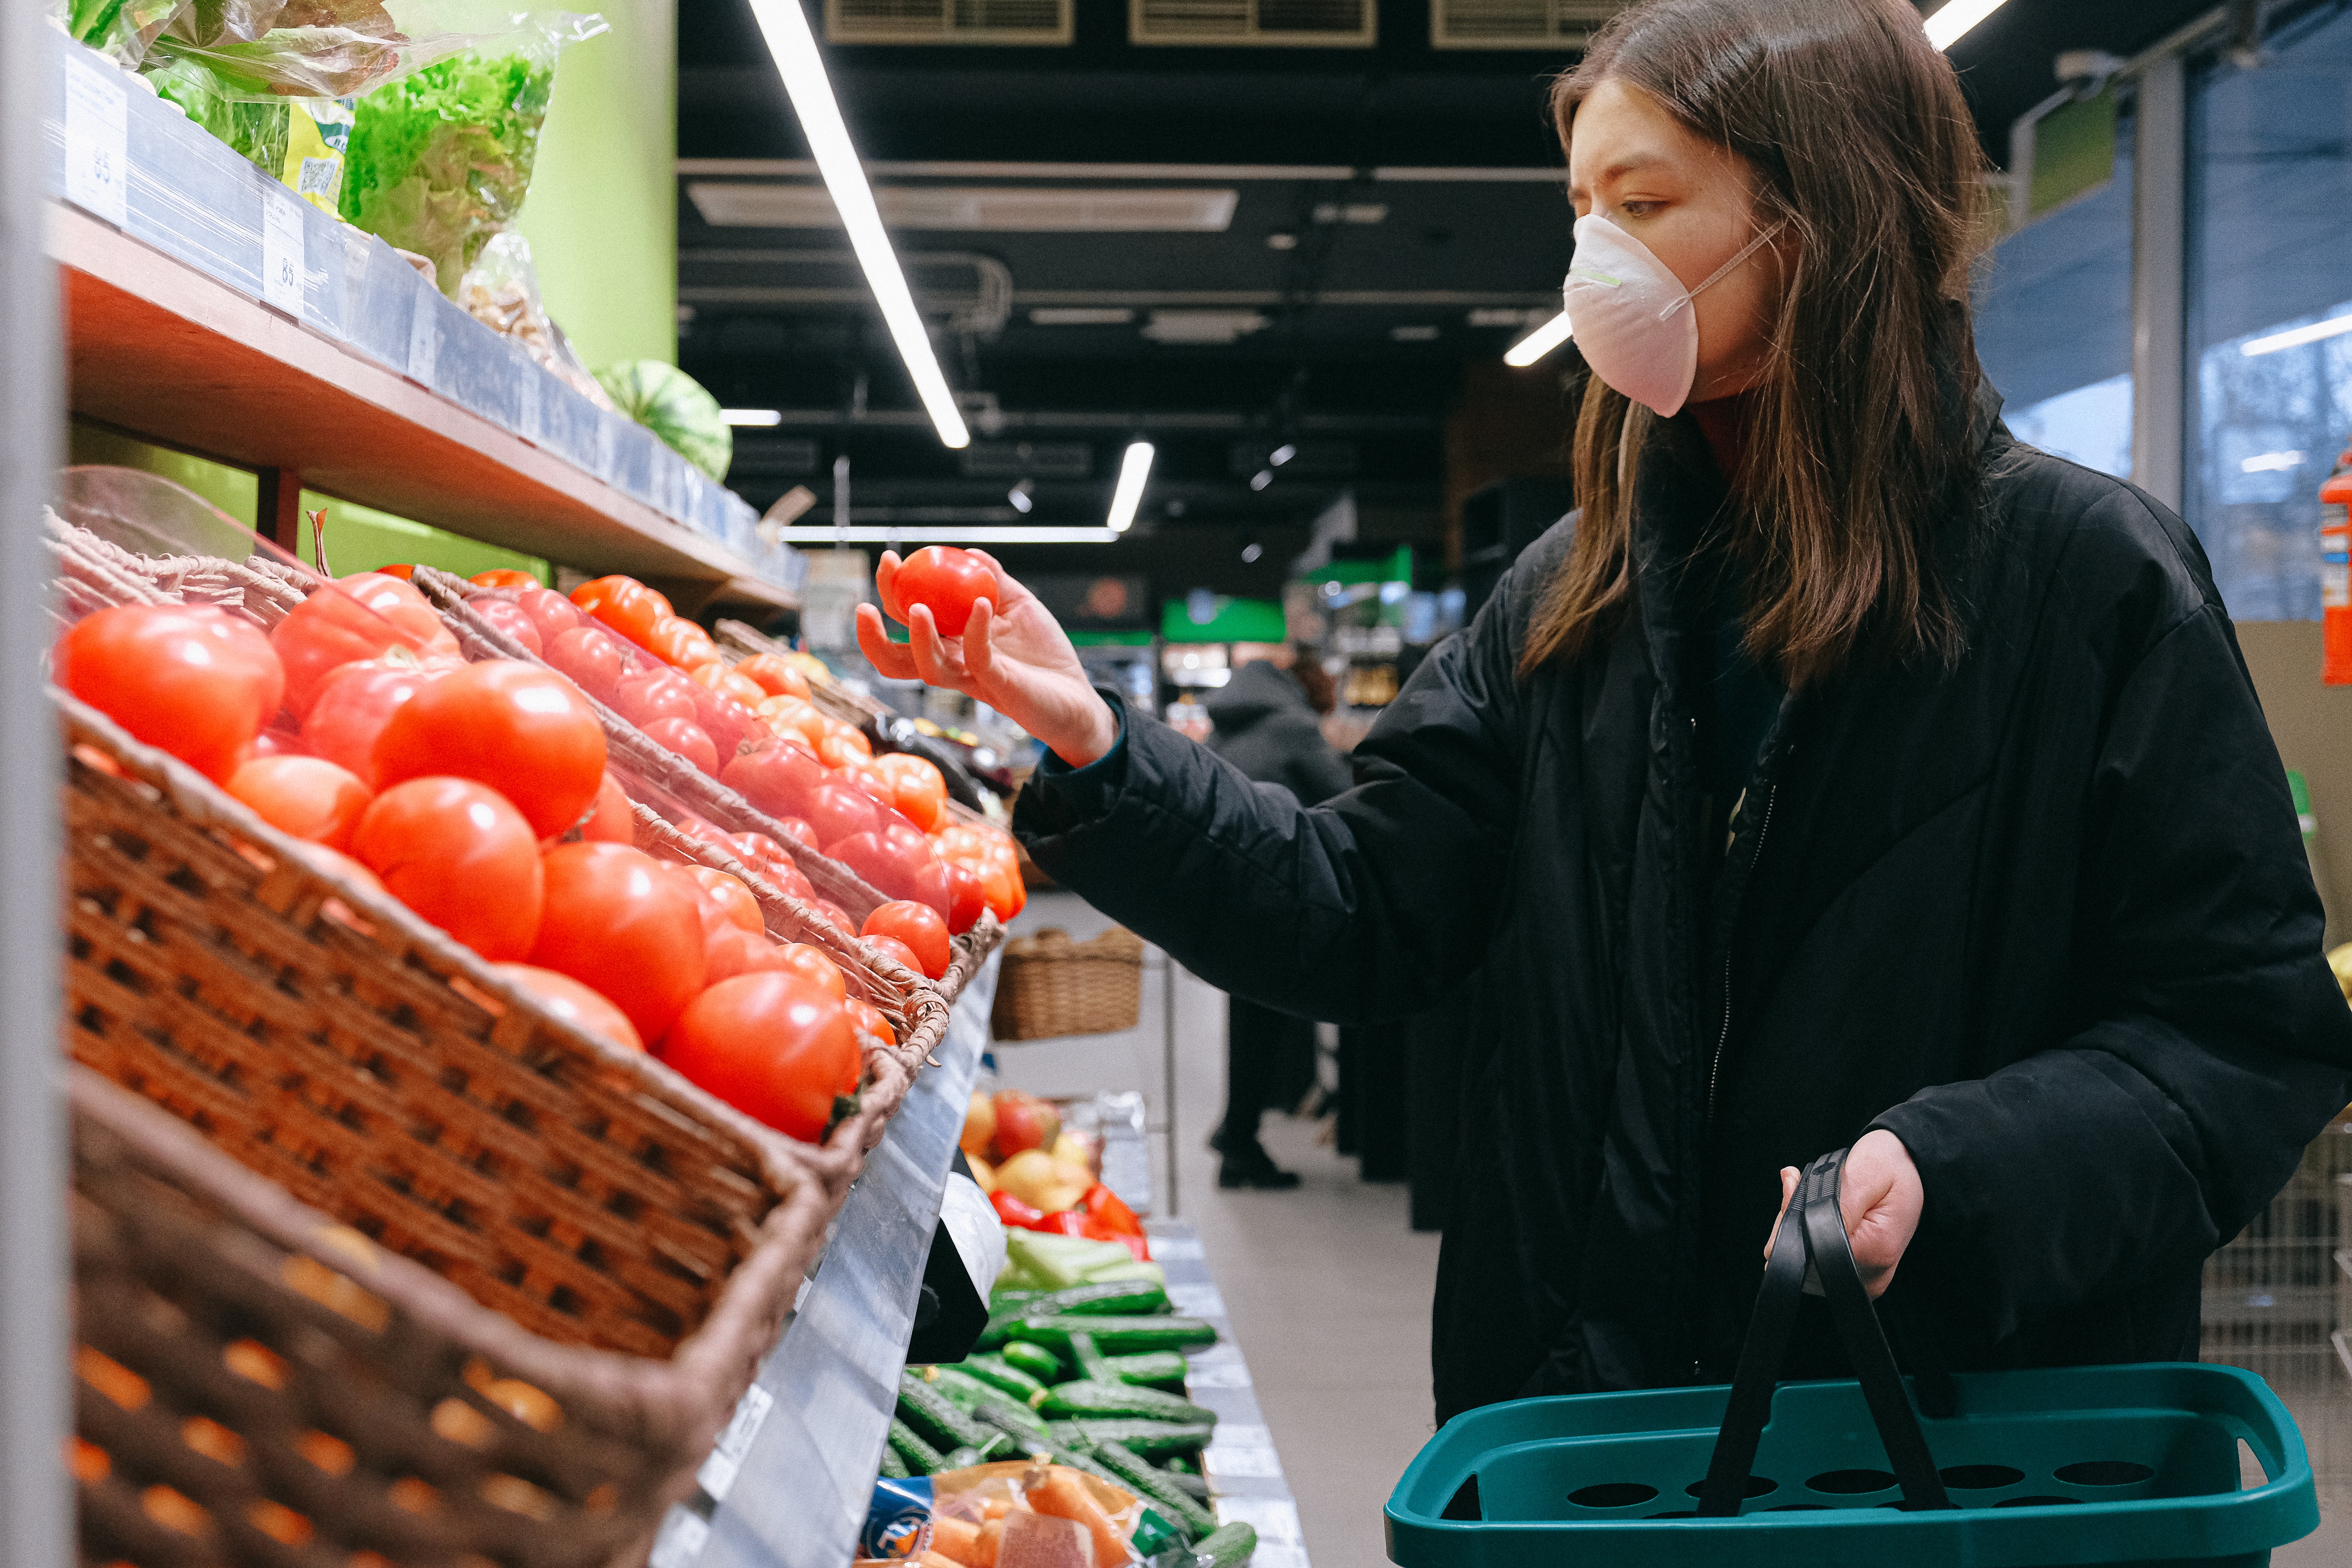 Woman wearing mask in supermarket shopping for tomatoes